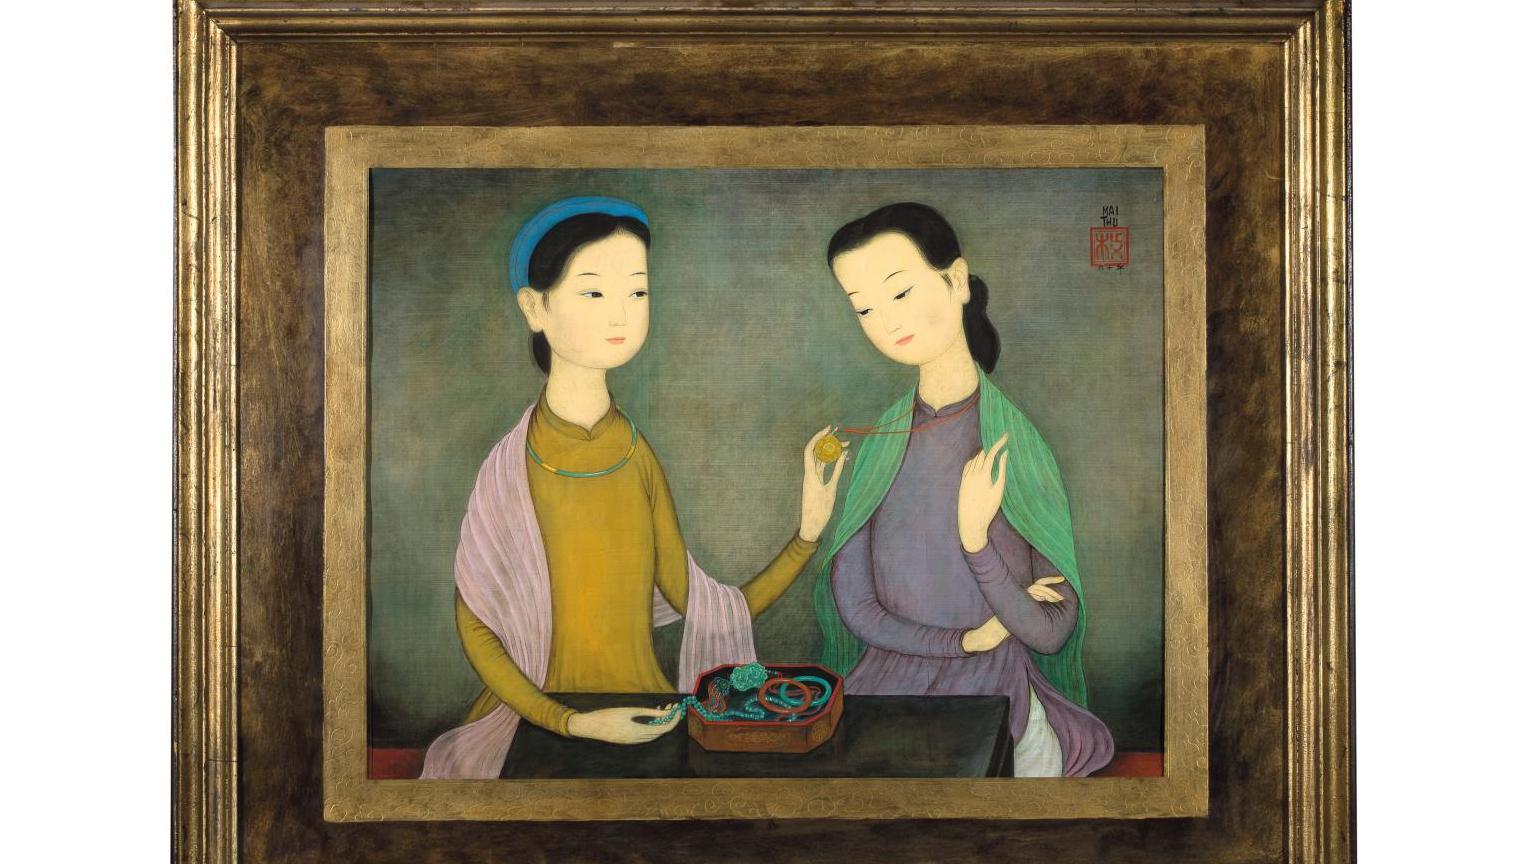 Mai Trung Thu (1906-1980), Le Coffret à bijoux (The Jewelry Box), 1960, ink and colors... Vietnam and France: Two Cultures Mirroring Each Other